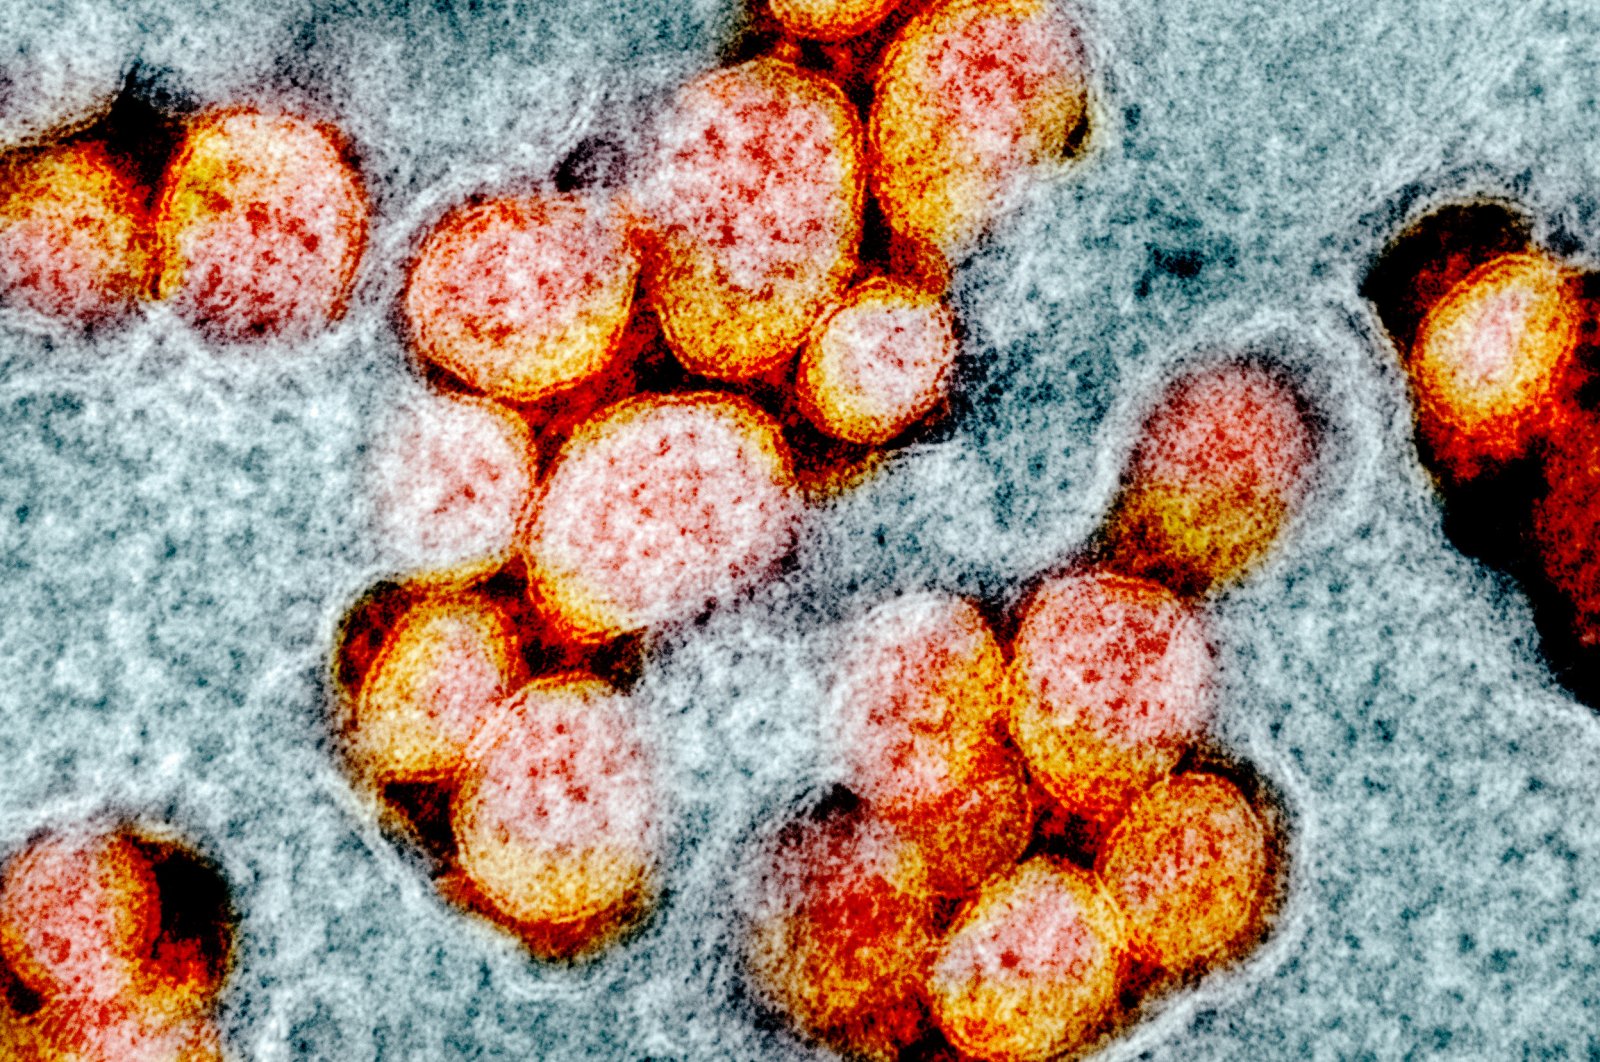 An undated transmission electron micrograph of SARS-CoV-2 shoıws virus particles isolated from a patient. (NIAID Integrated Research Facility (IRF)/Handout via REUTERS)